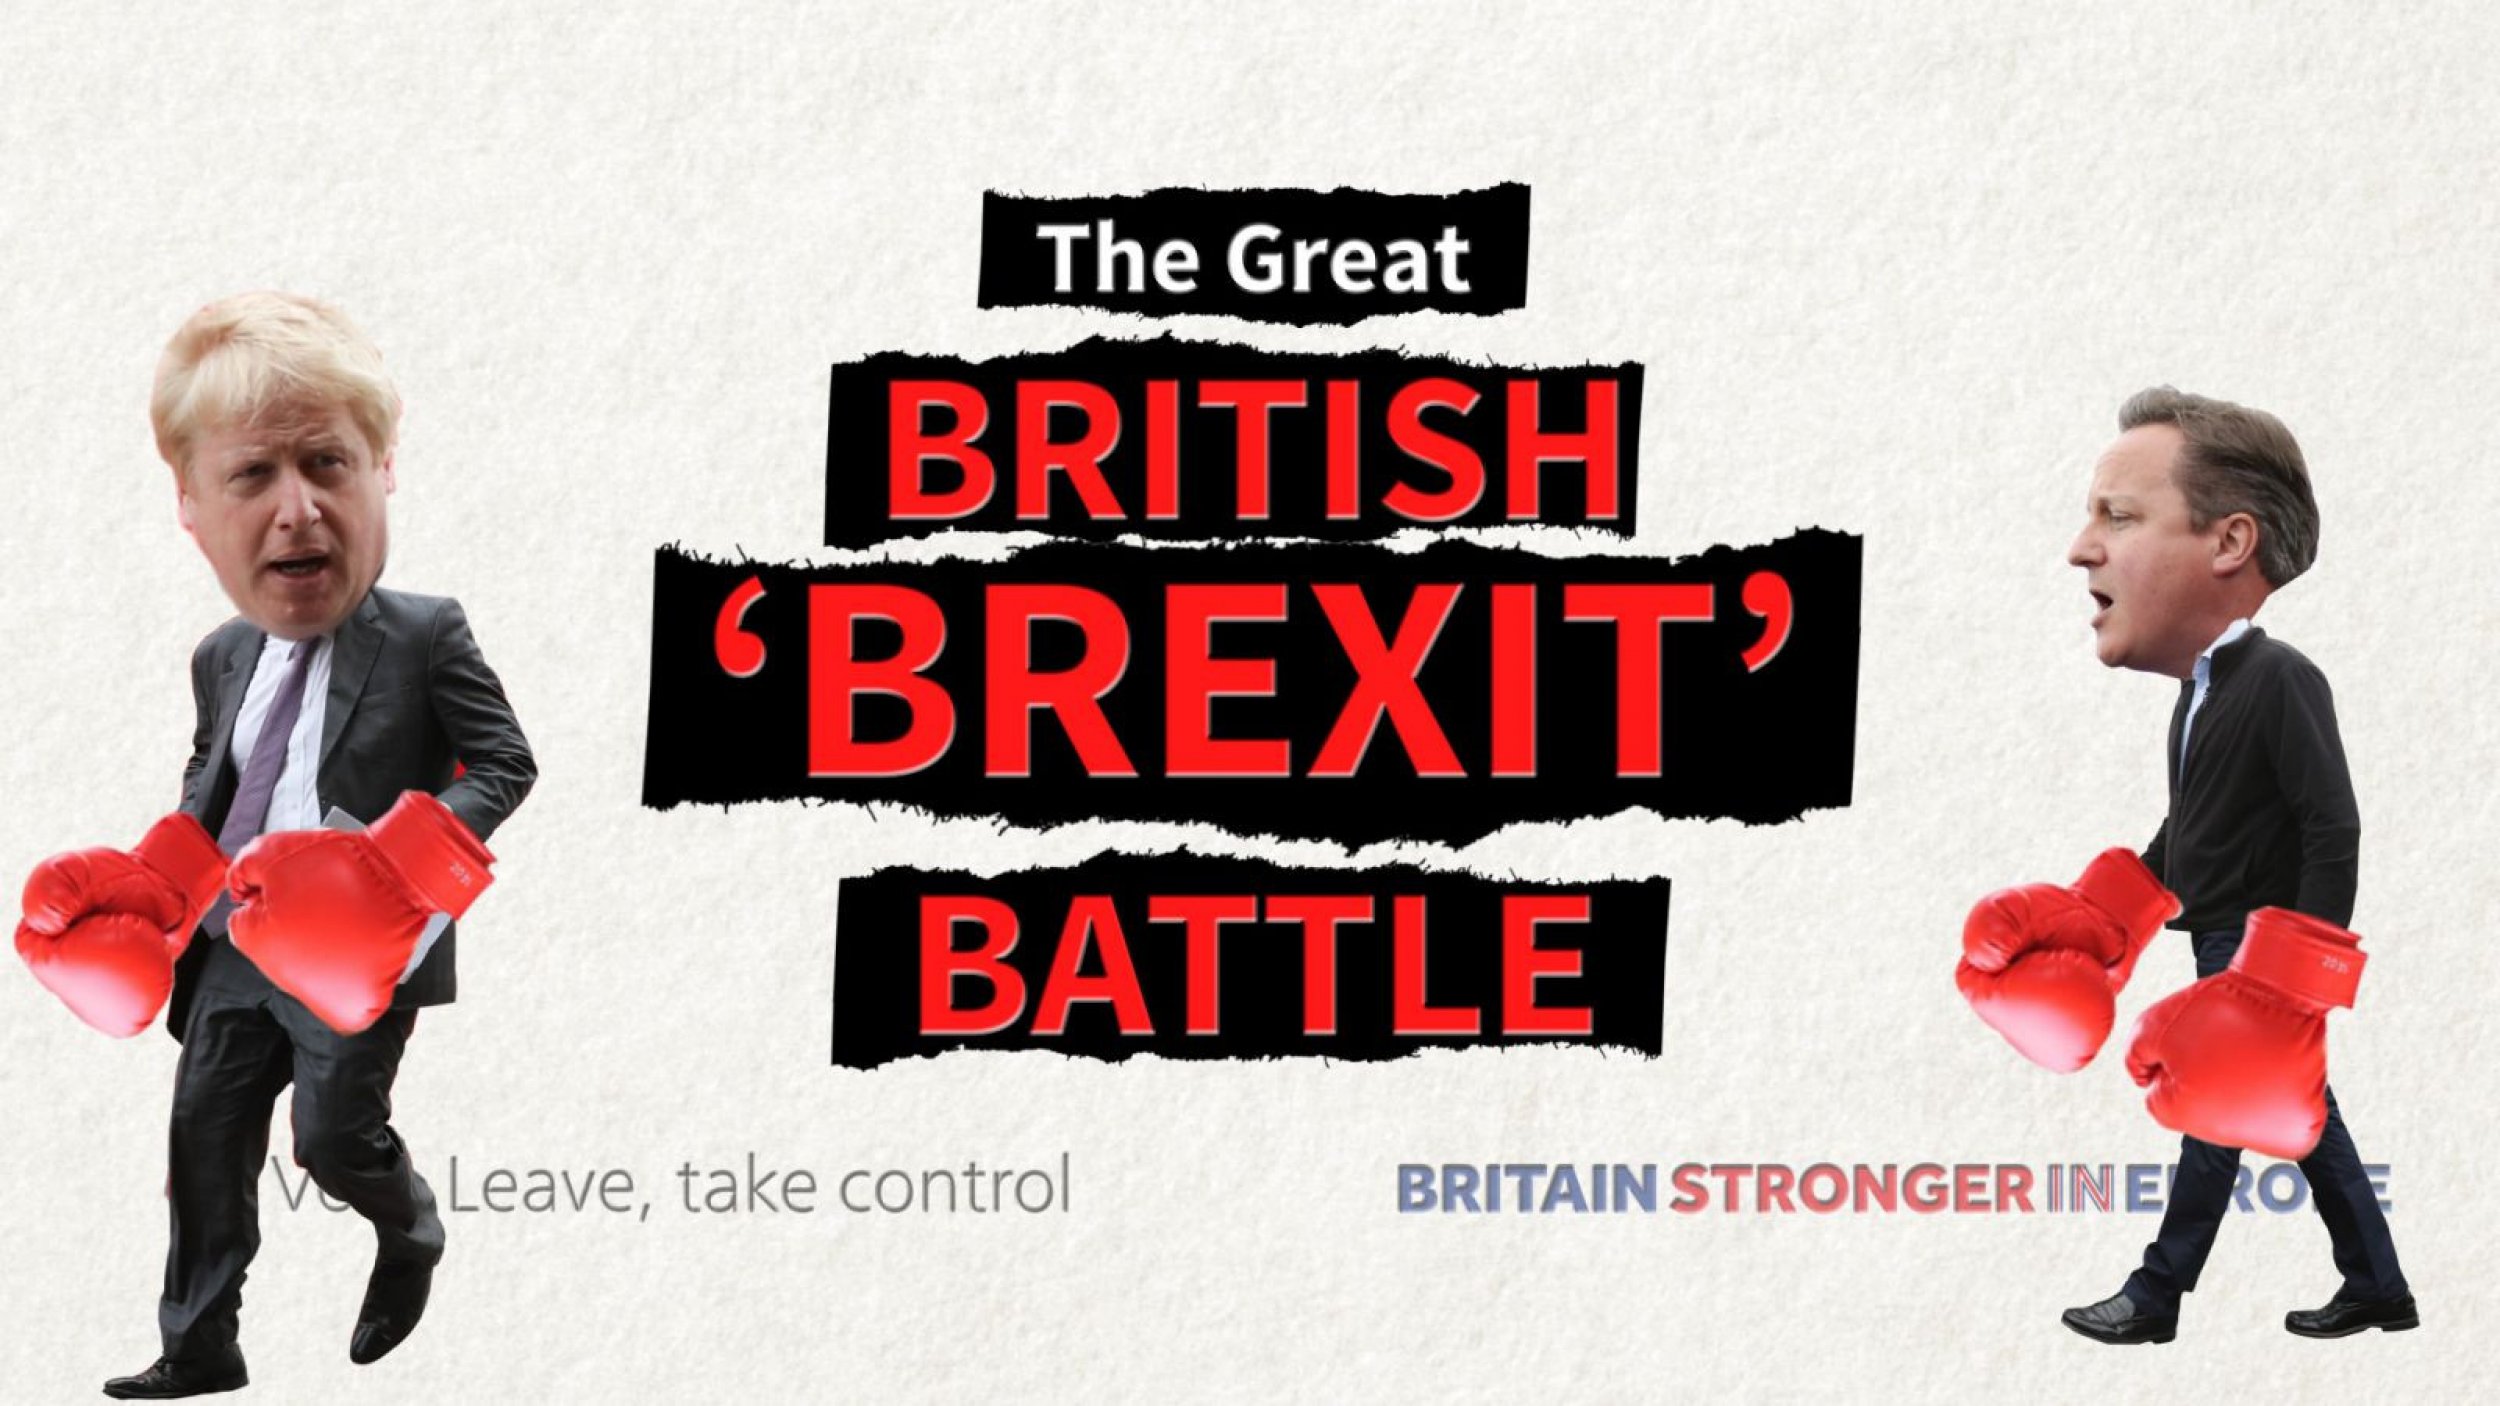 The Great British Brexit Battle How It Happened